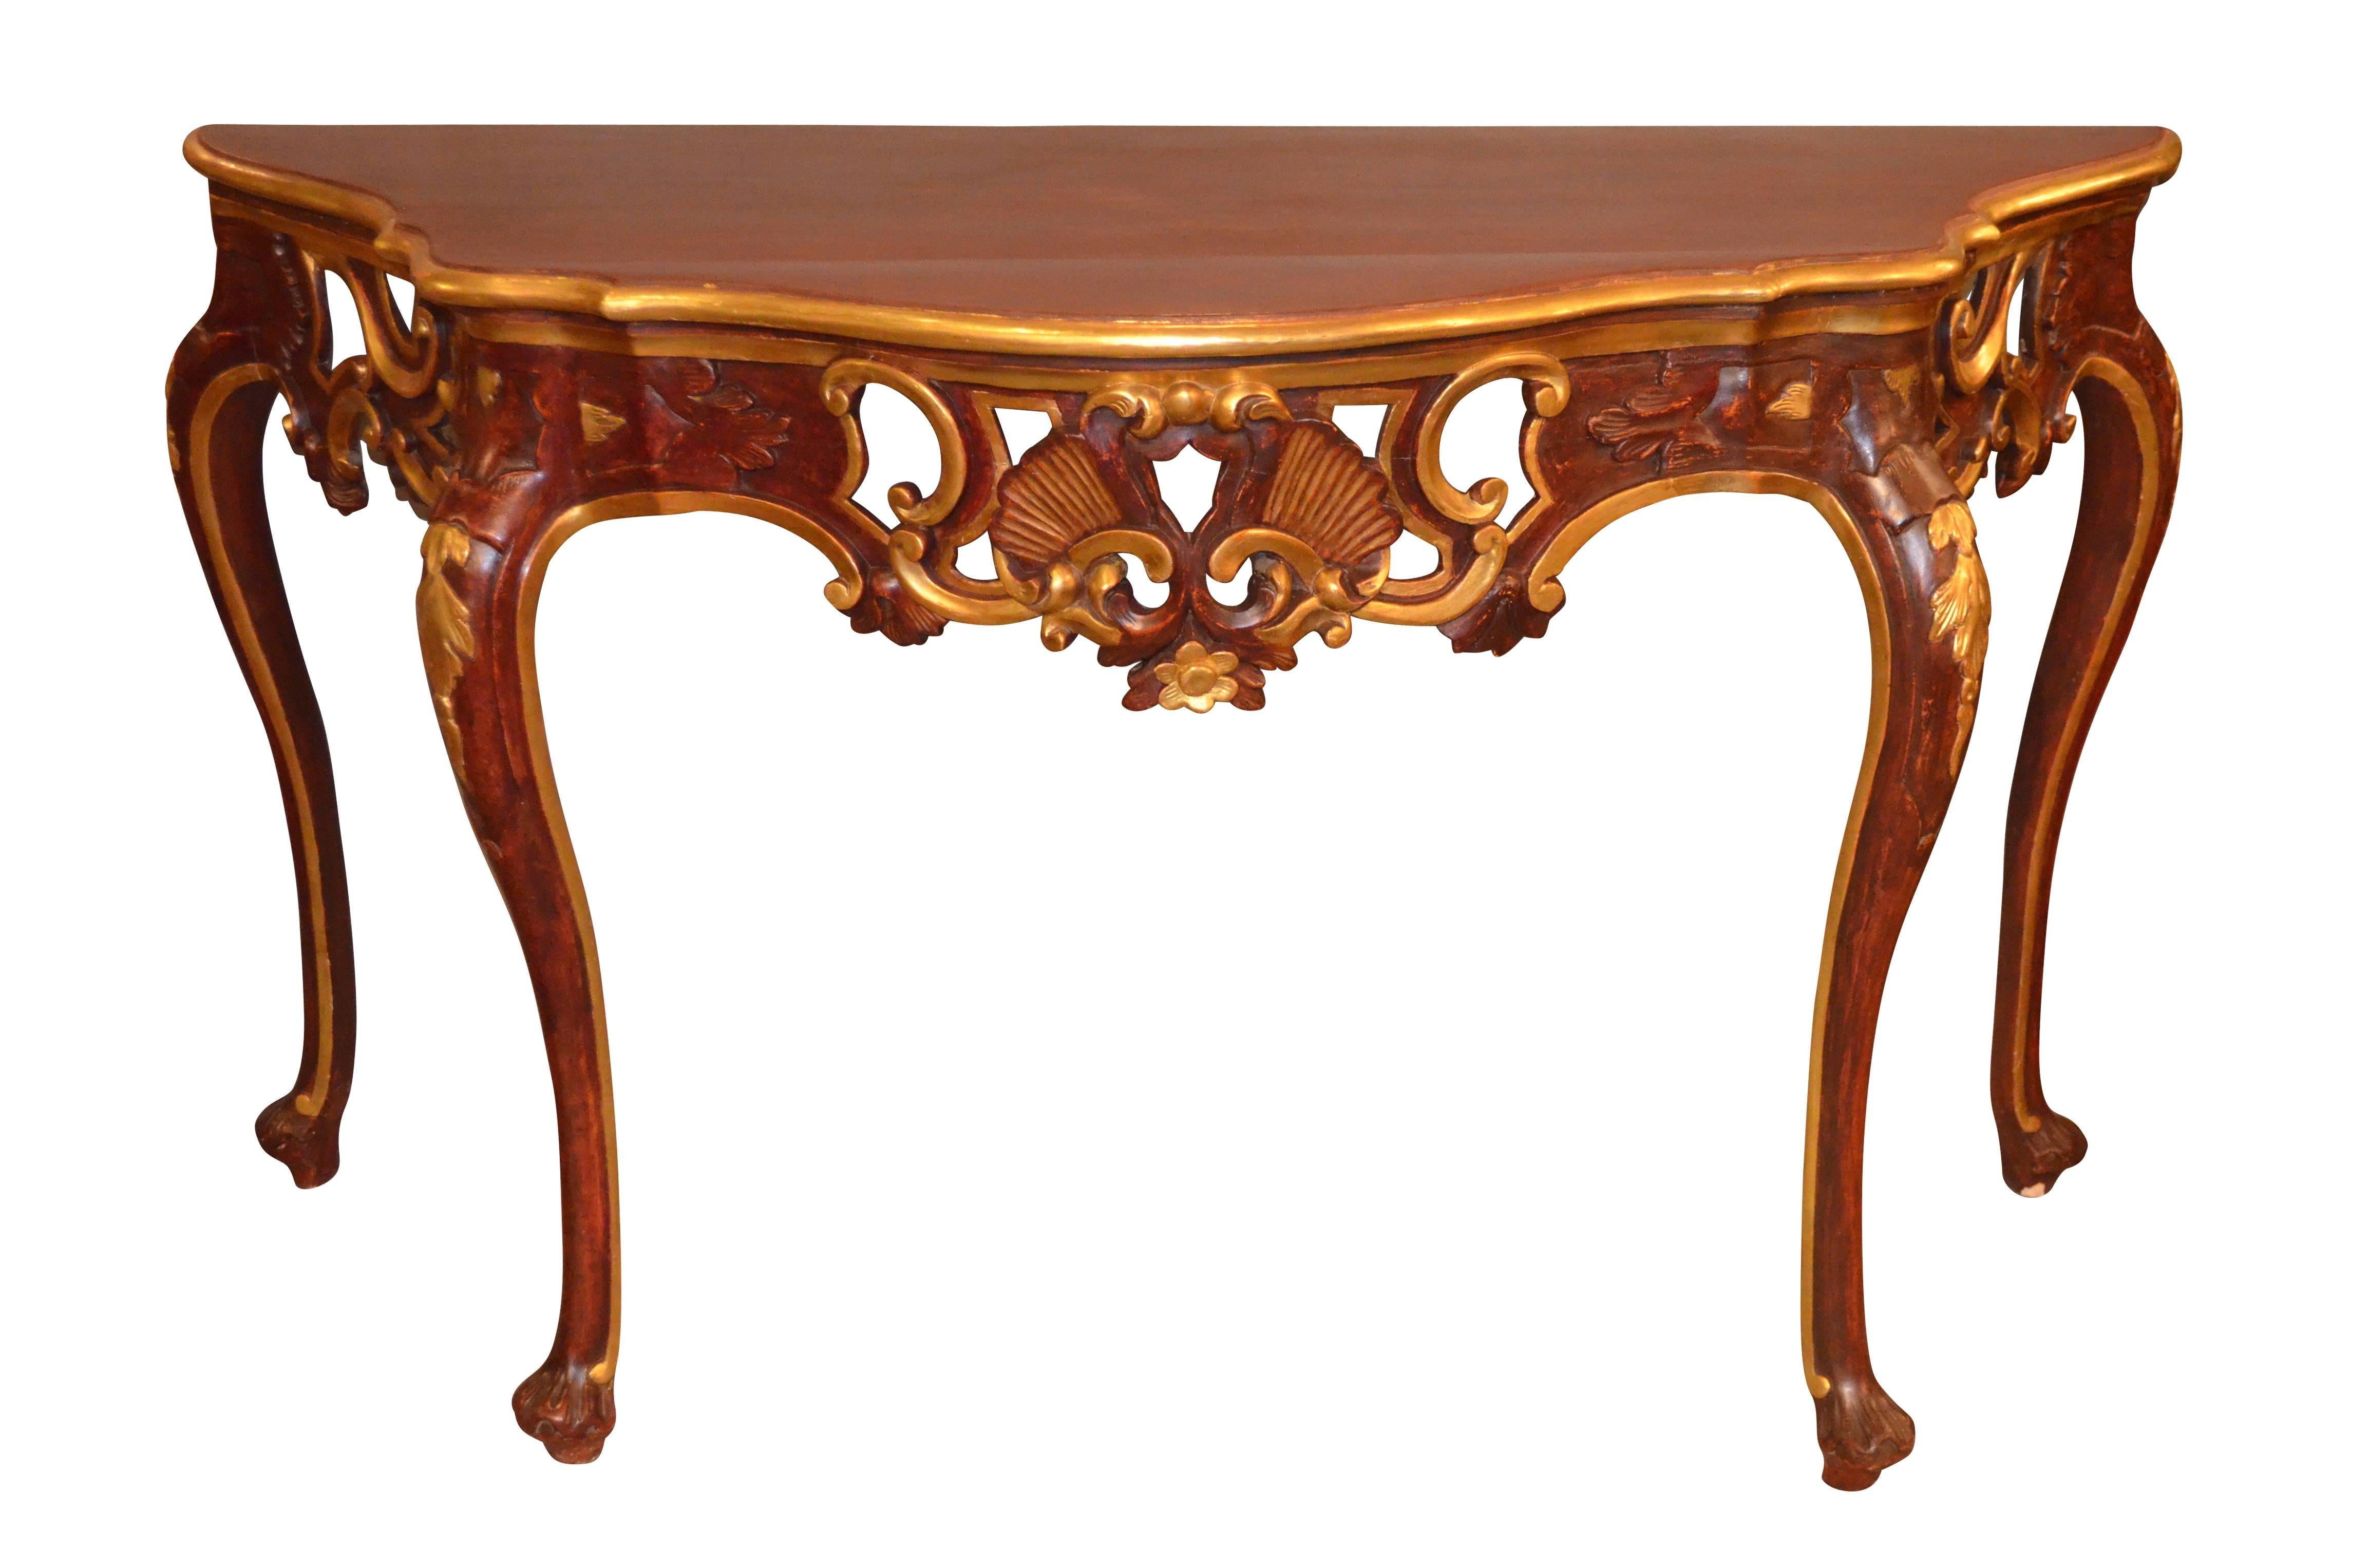 19th pair of painted and giltwood Italian console tables with serpentine front, of superb quality and size with beautiful detailed carving.